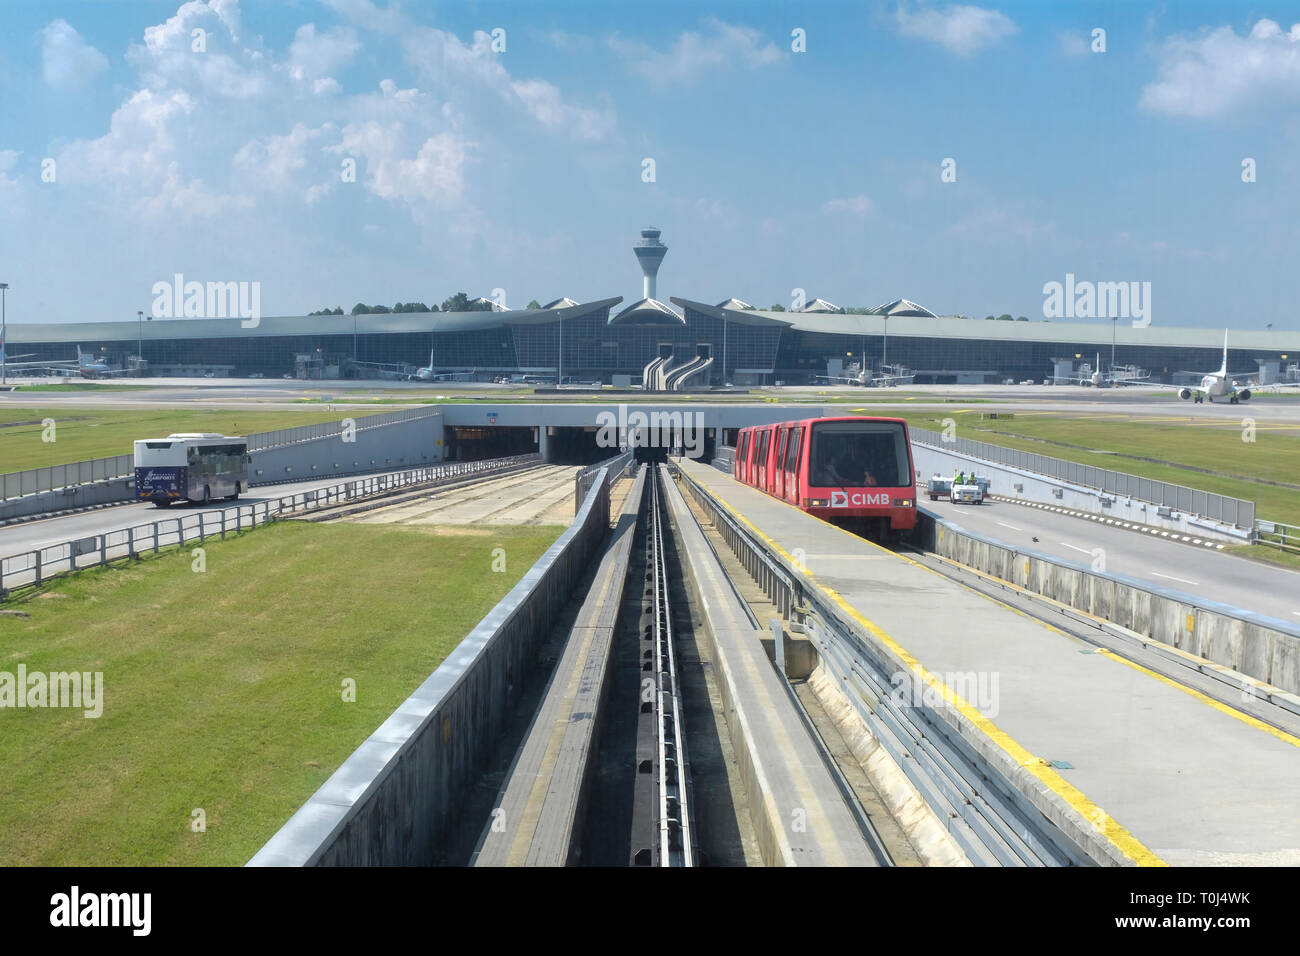 The driverless train and shuttle bus services between terminals where planes airrive and depart at Kuala Lumpur International Airport Stock Photo